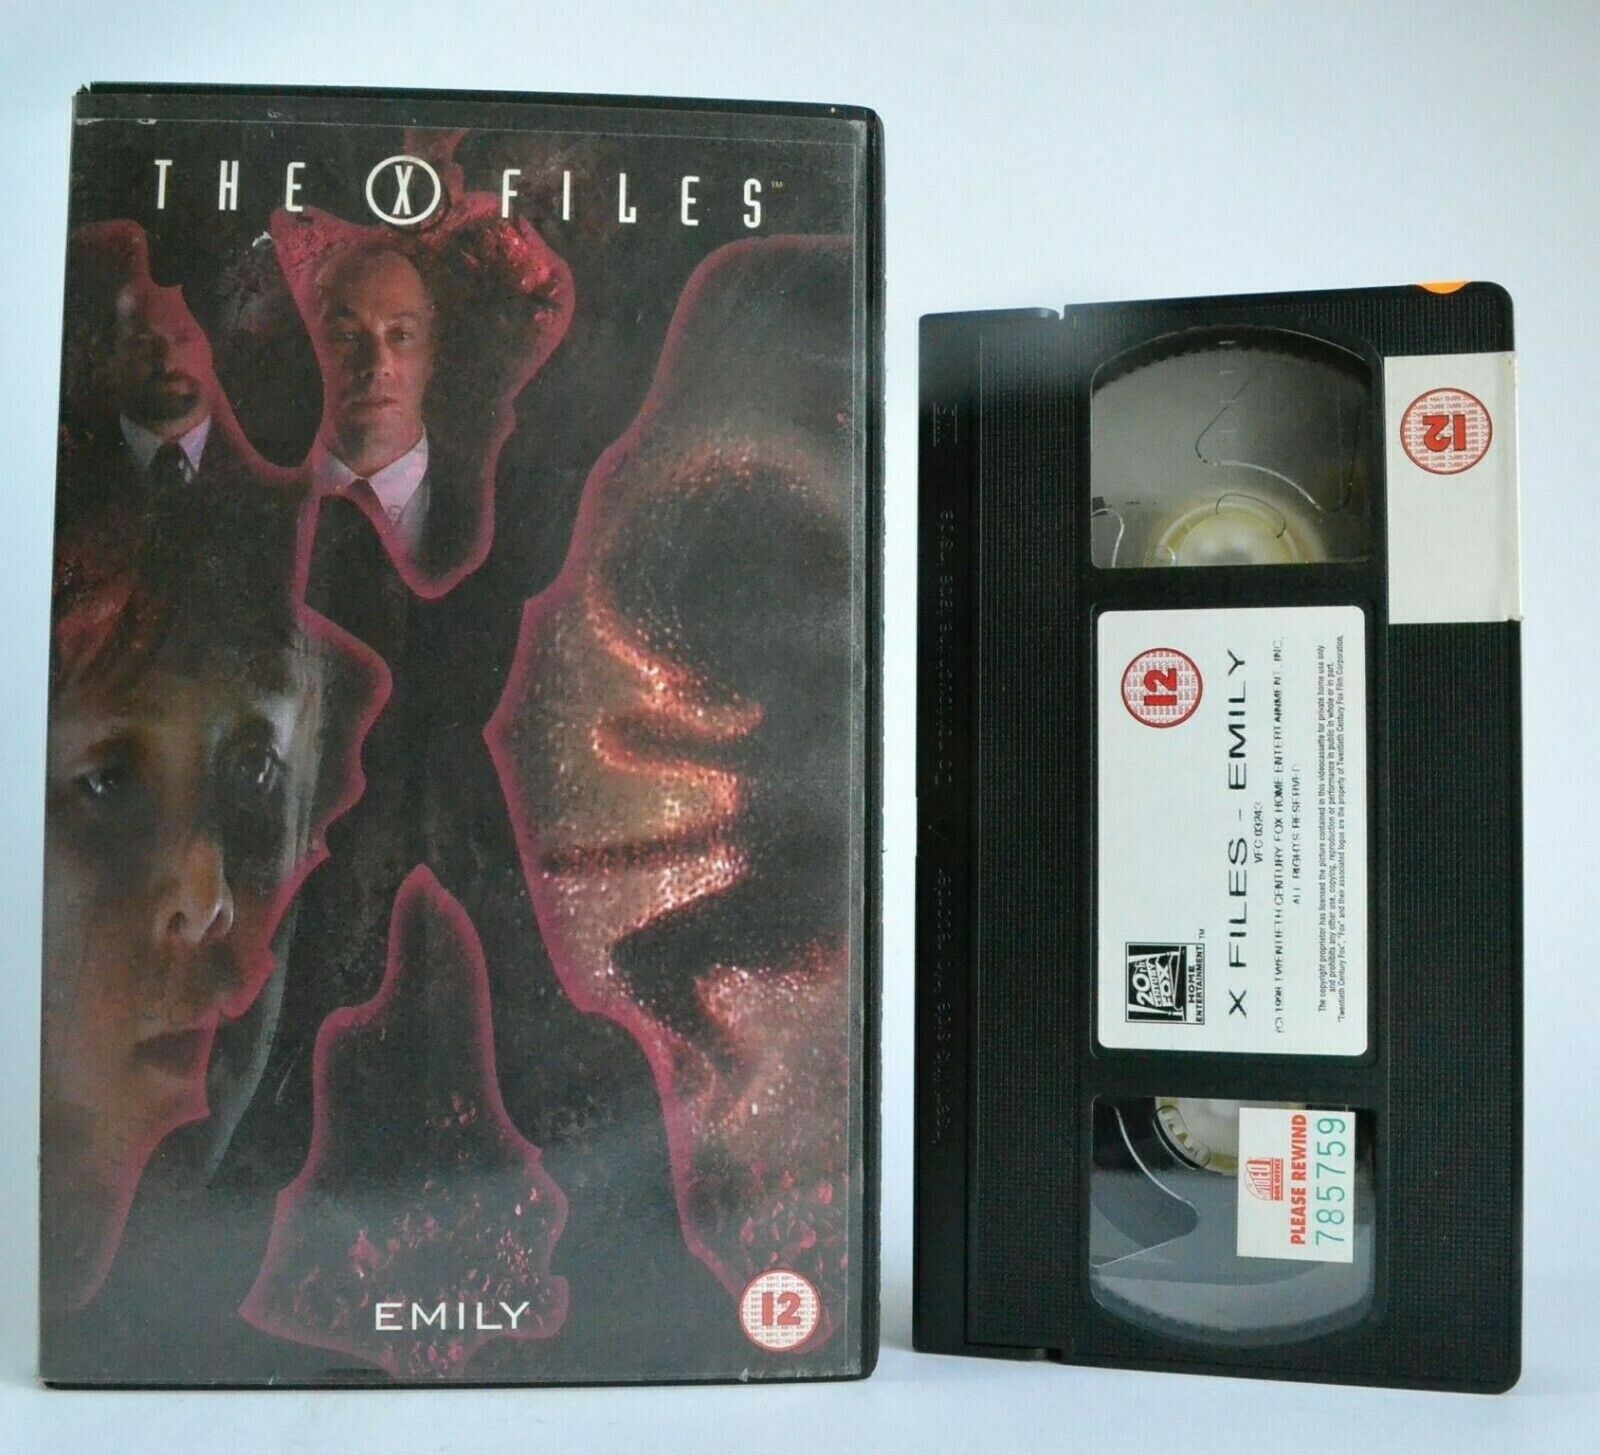 The X-Files: Emily - Sci-Fi TV Series - Large Box - Gillian Anderson - Pal VHS-